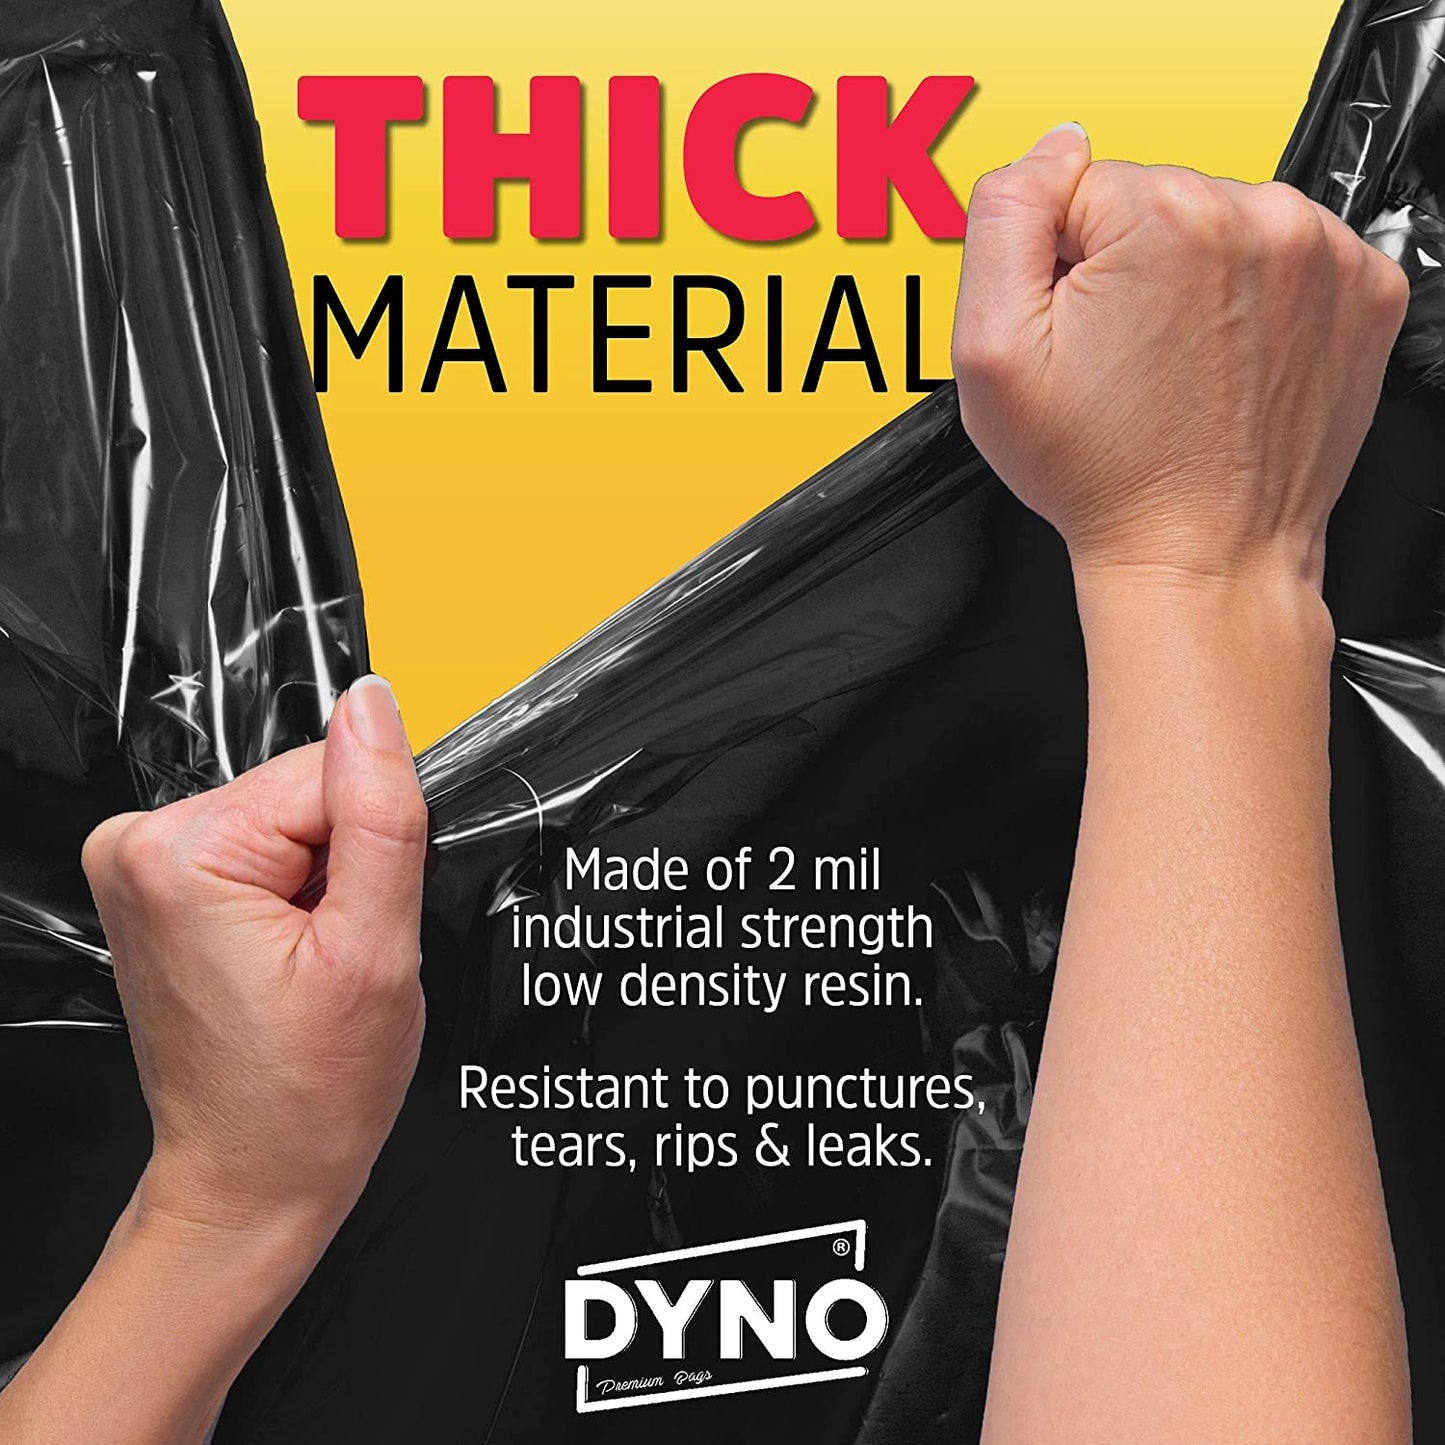 Dyno Products Online 95-Gallon, 2 Mil Thick Heavy-Duty Black Trash Bags - 25 Count Extra Large Plastic Garbage Liners Fit Huge Cans for Home Garden Lawn Yard Recycling Construction & Commercial Use